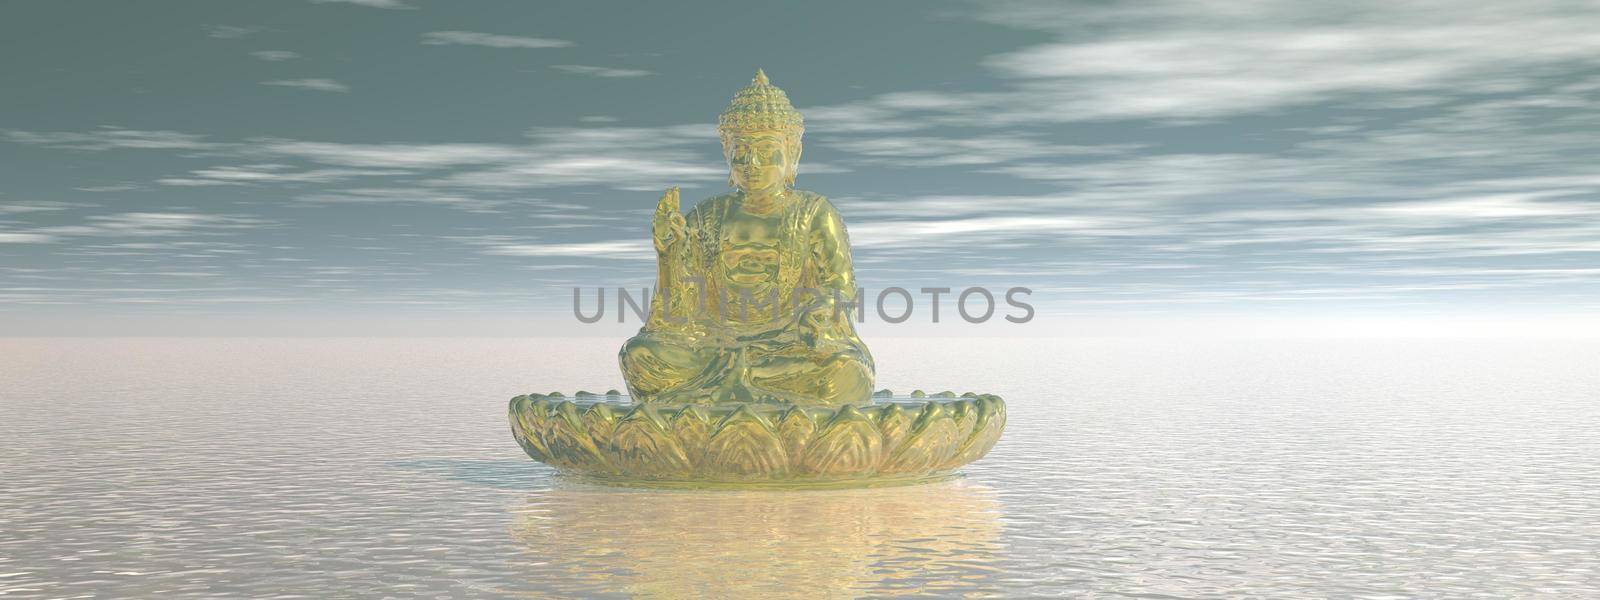 very beautiful zen and buddha landscape - 3d rendering by mariephotos